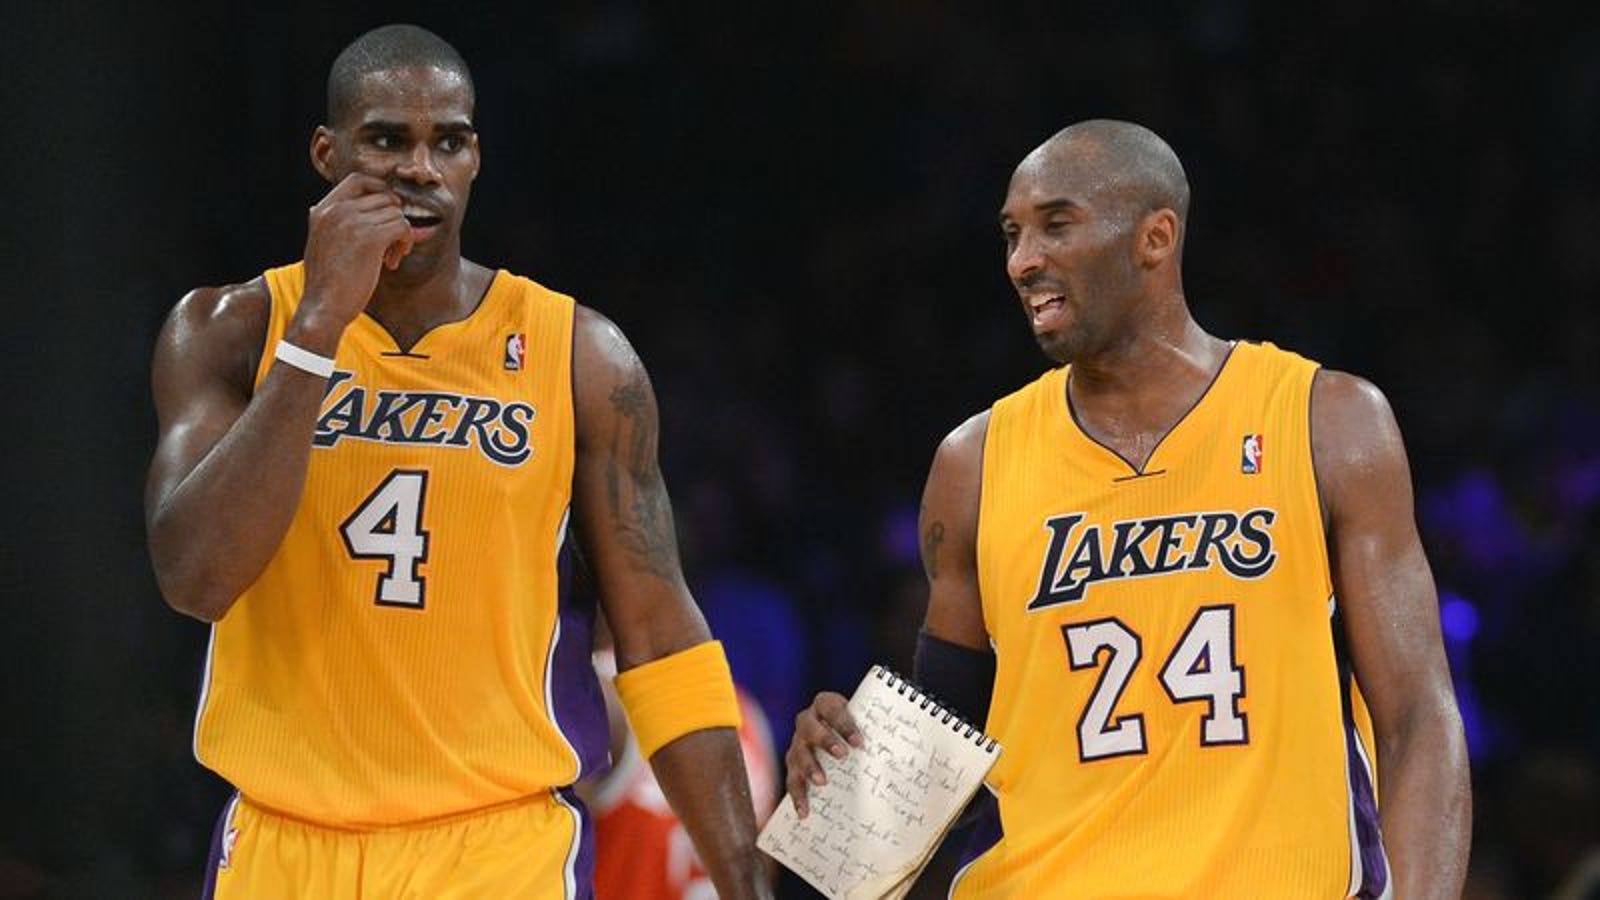 Kobe Bryant Compiles Helpful List Of 435 Aspects Of Game Antawn Jamison Needs To Improve